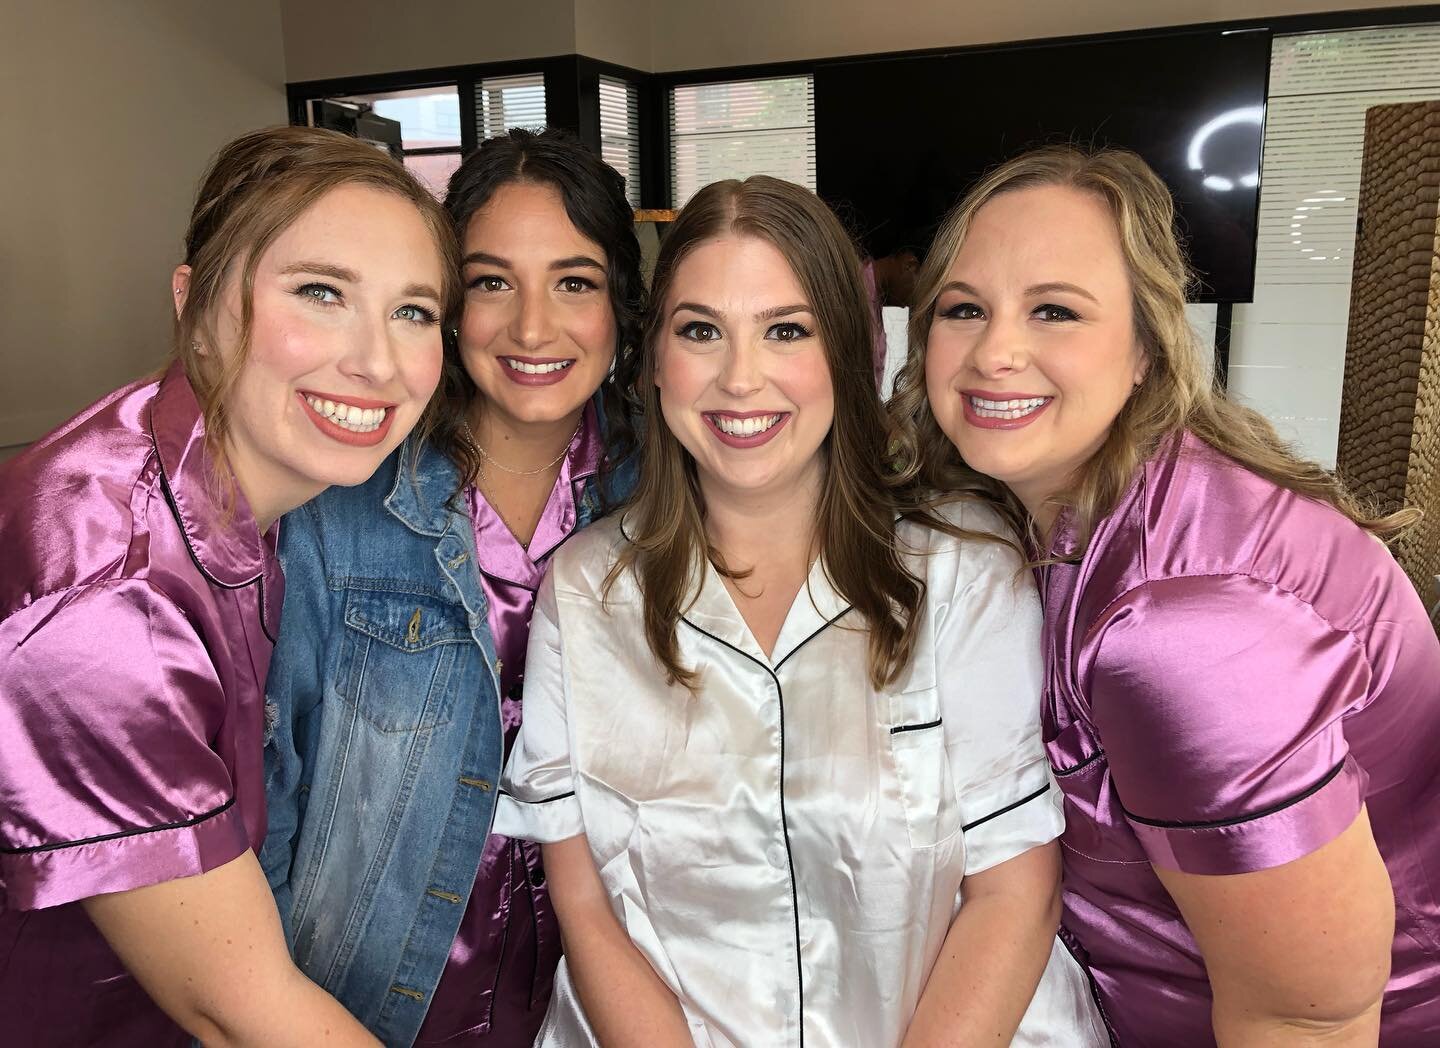 Bridal Party Makeup for an absolutely beautiful group of ladies!

I&rsquo;m so thankful I got to work with them ❤️

For Inquiries:

HTTPS://www.makeupbycaitlin.com

https://www.facebook.com/makeupbycaitlinspah/

Instagram : @caitlinguillien_mua 

#br